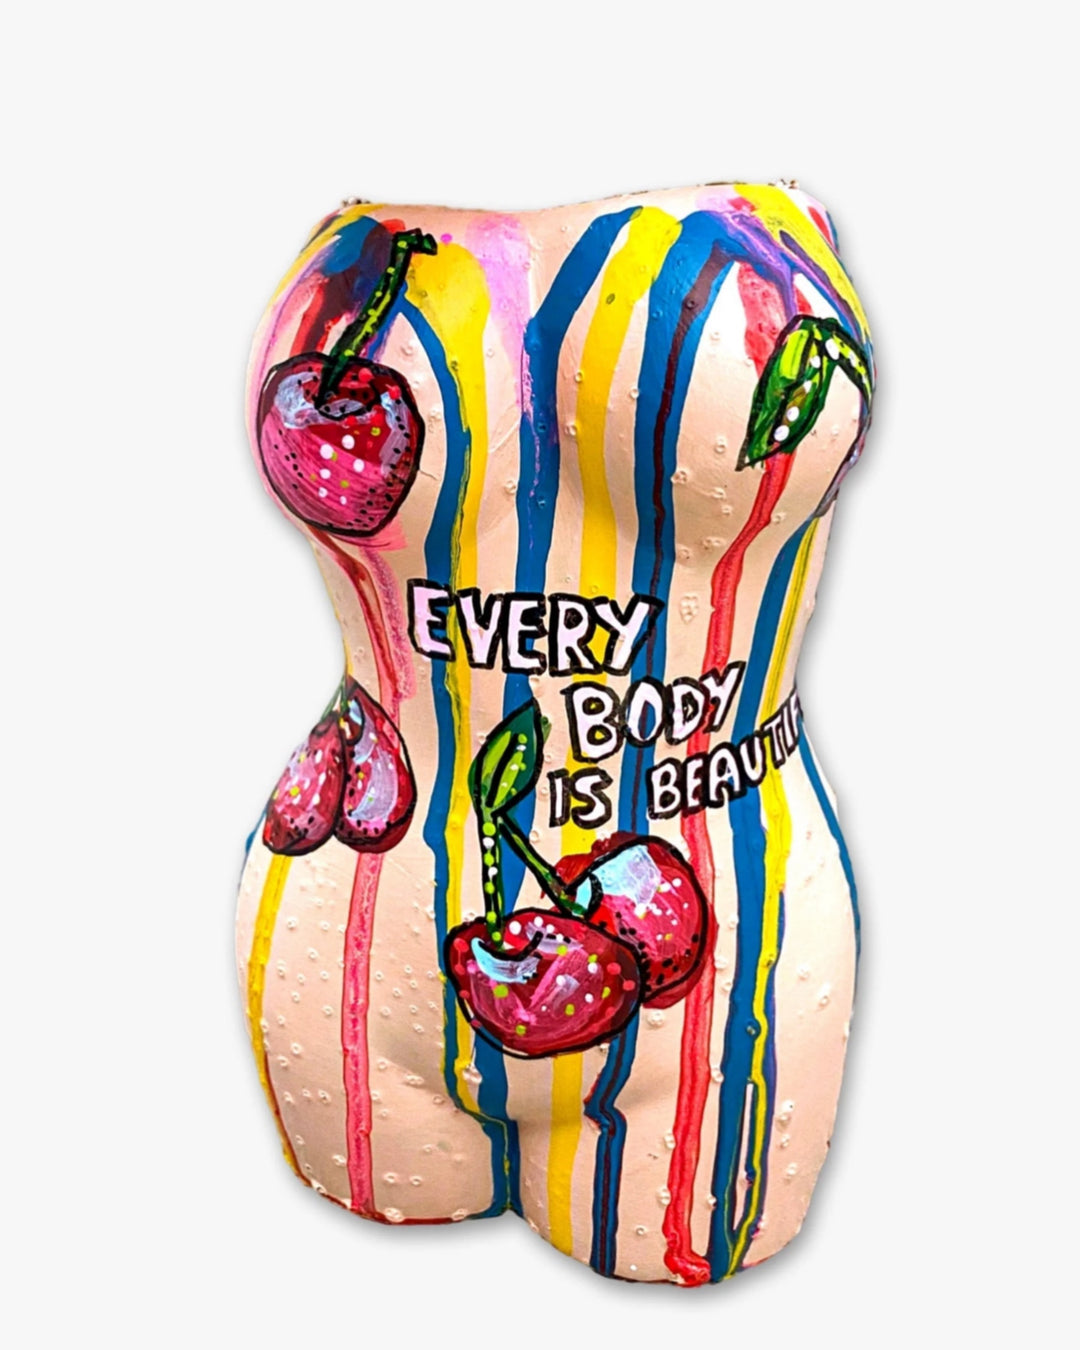 Every Body Is Beautiful Vase